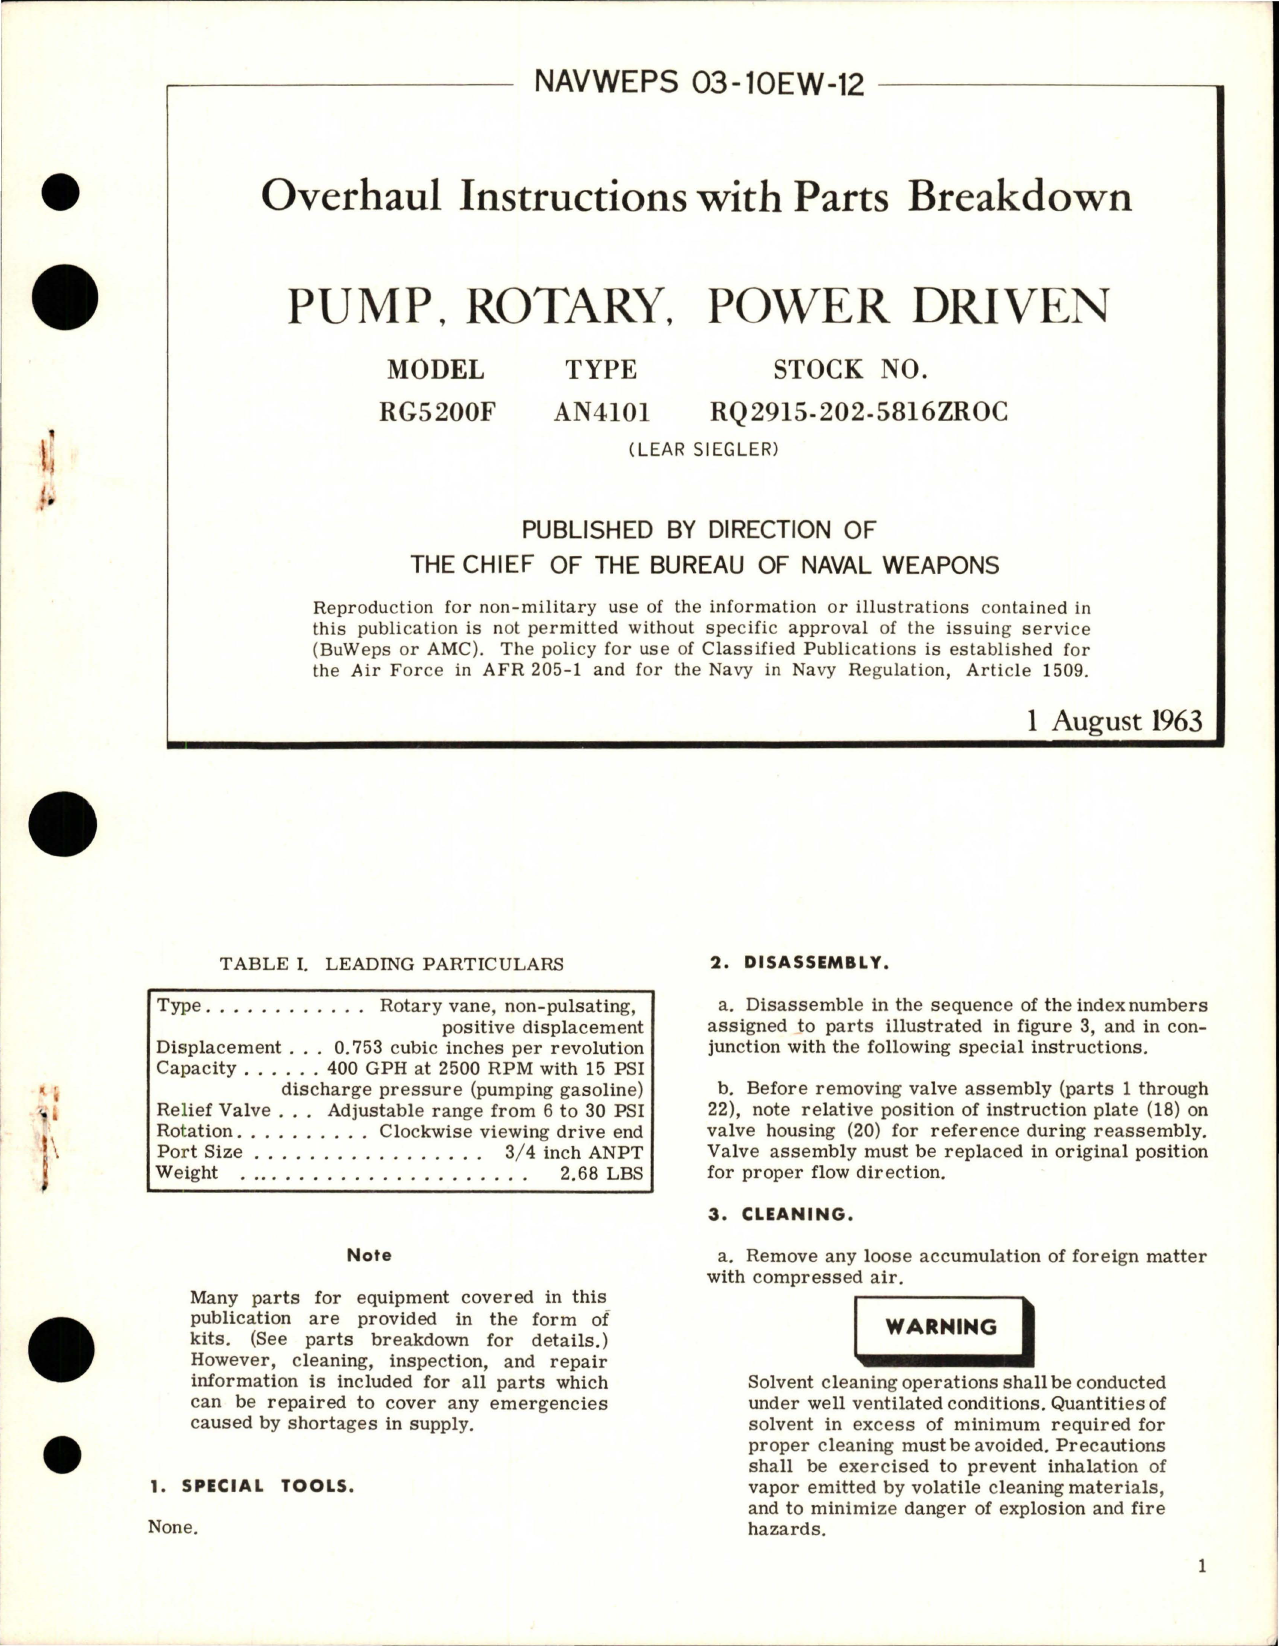 Sample page 1 from AirCorps Library document: Overhaul Instructions with Parts for Power Driven Rotary Pump - Model RG5200F - Type AN4101